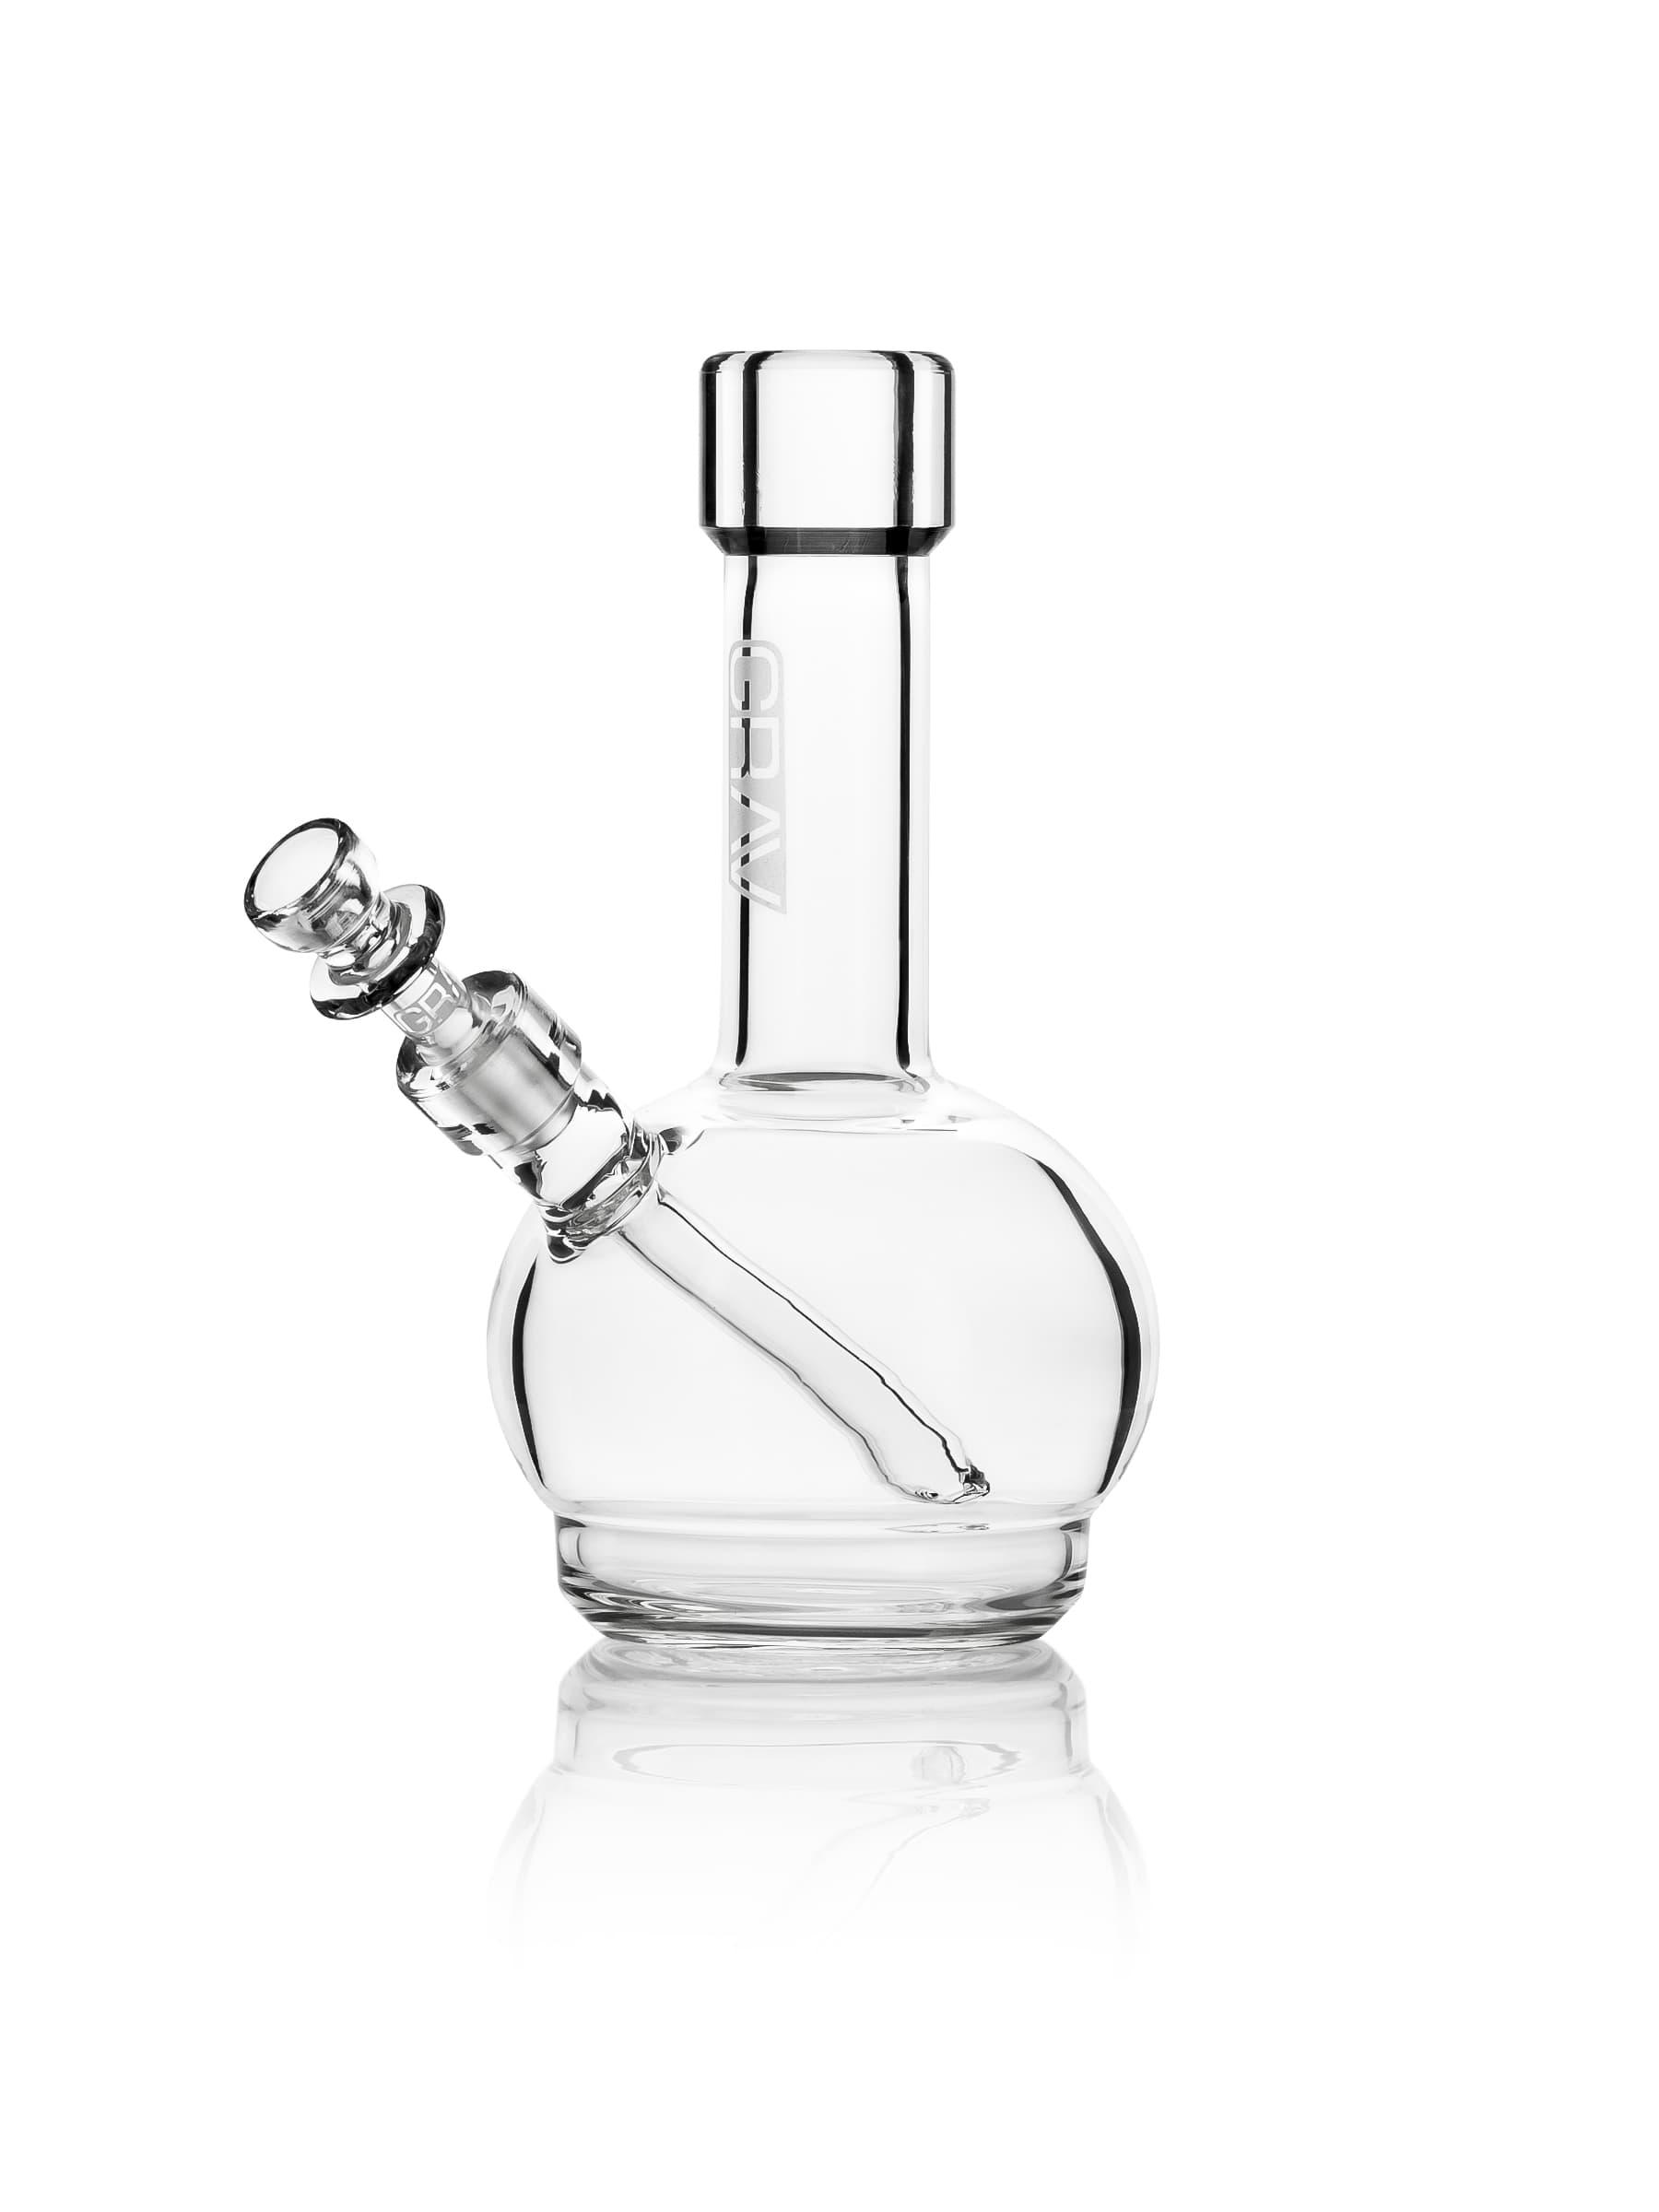 Bubblers for Sale  Bubbler Pipes and Bongs